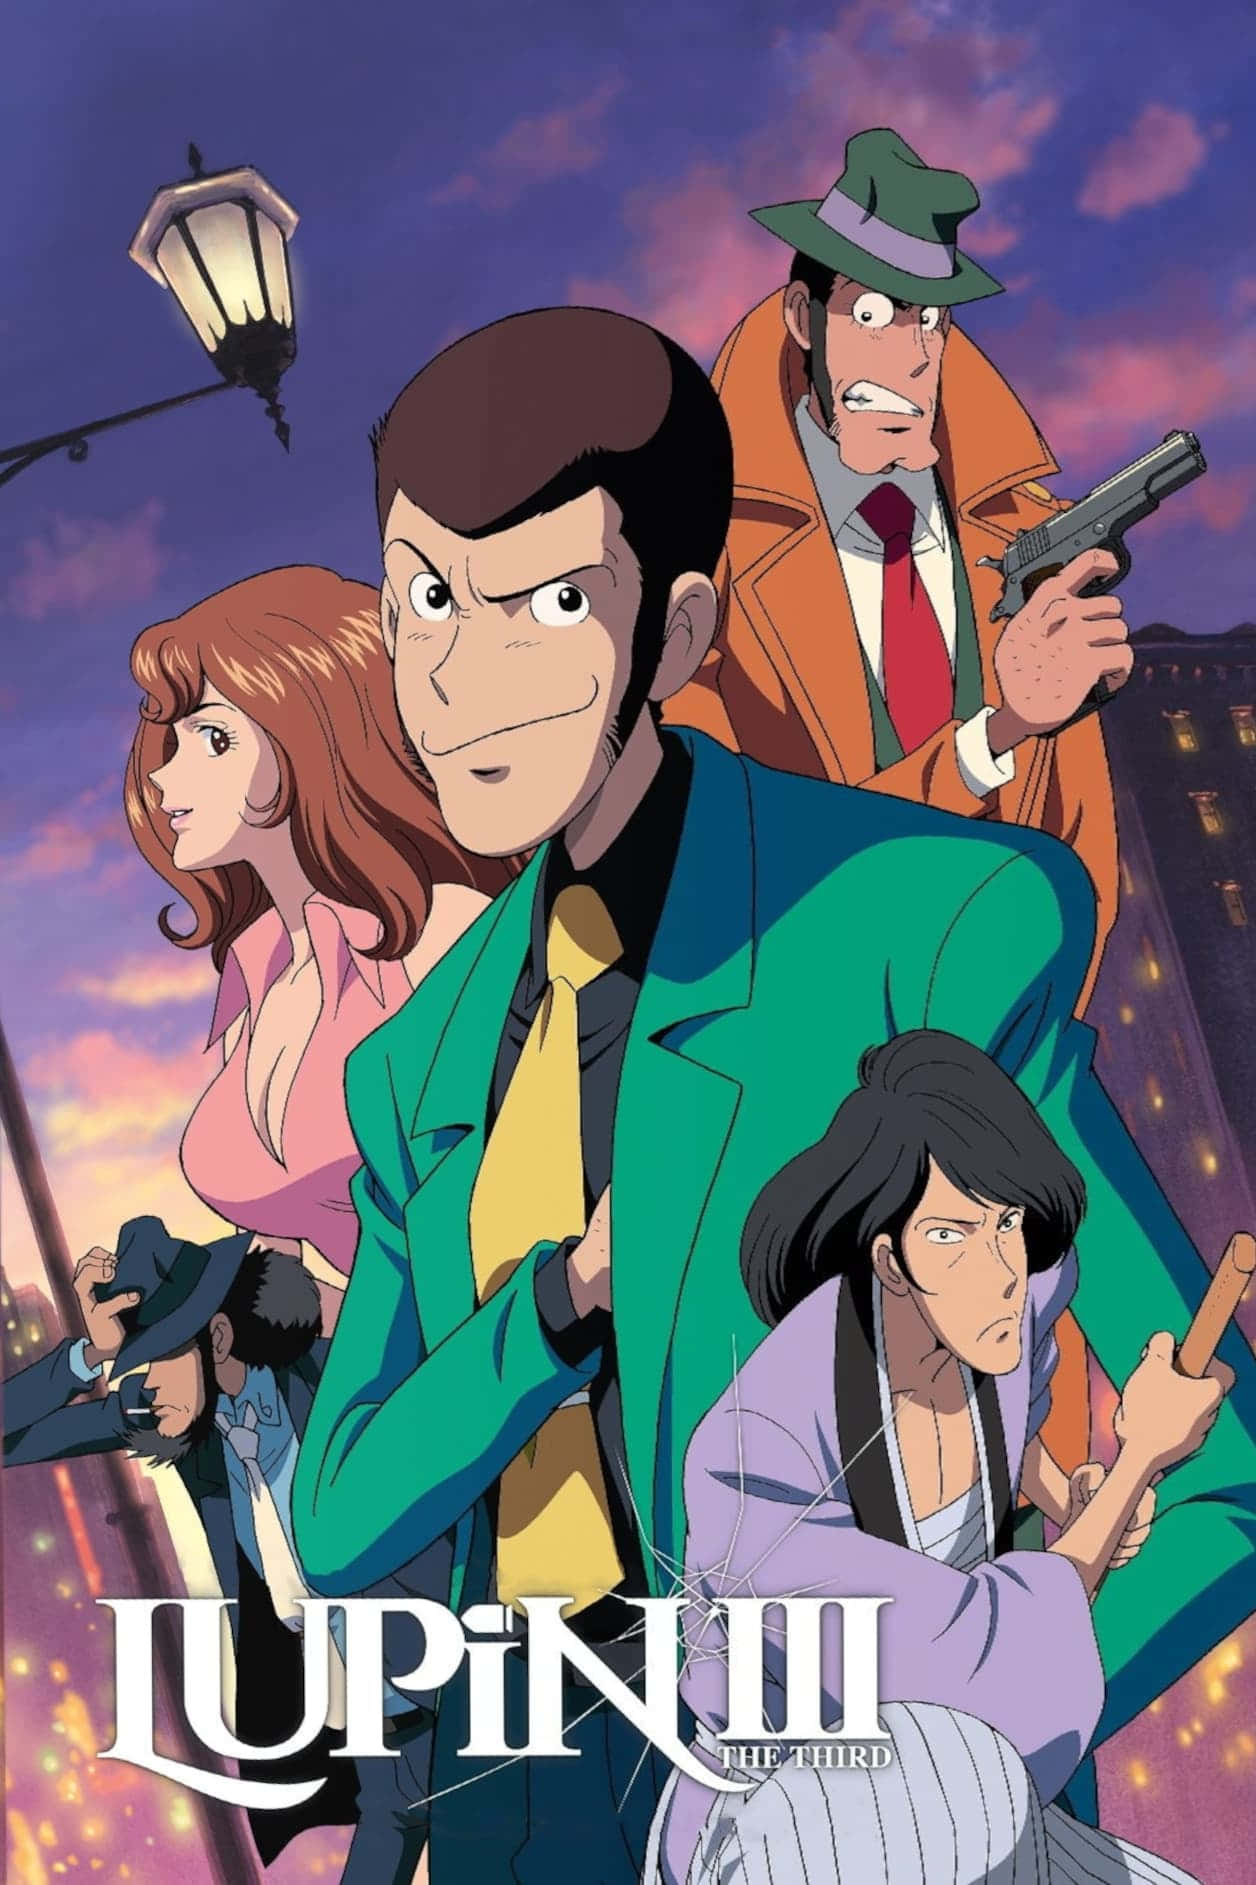 Lupin III and his gang in action on a daring mission Wallpaper